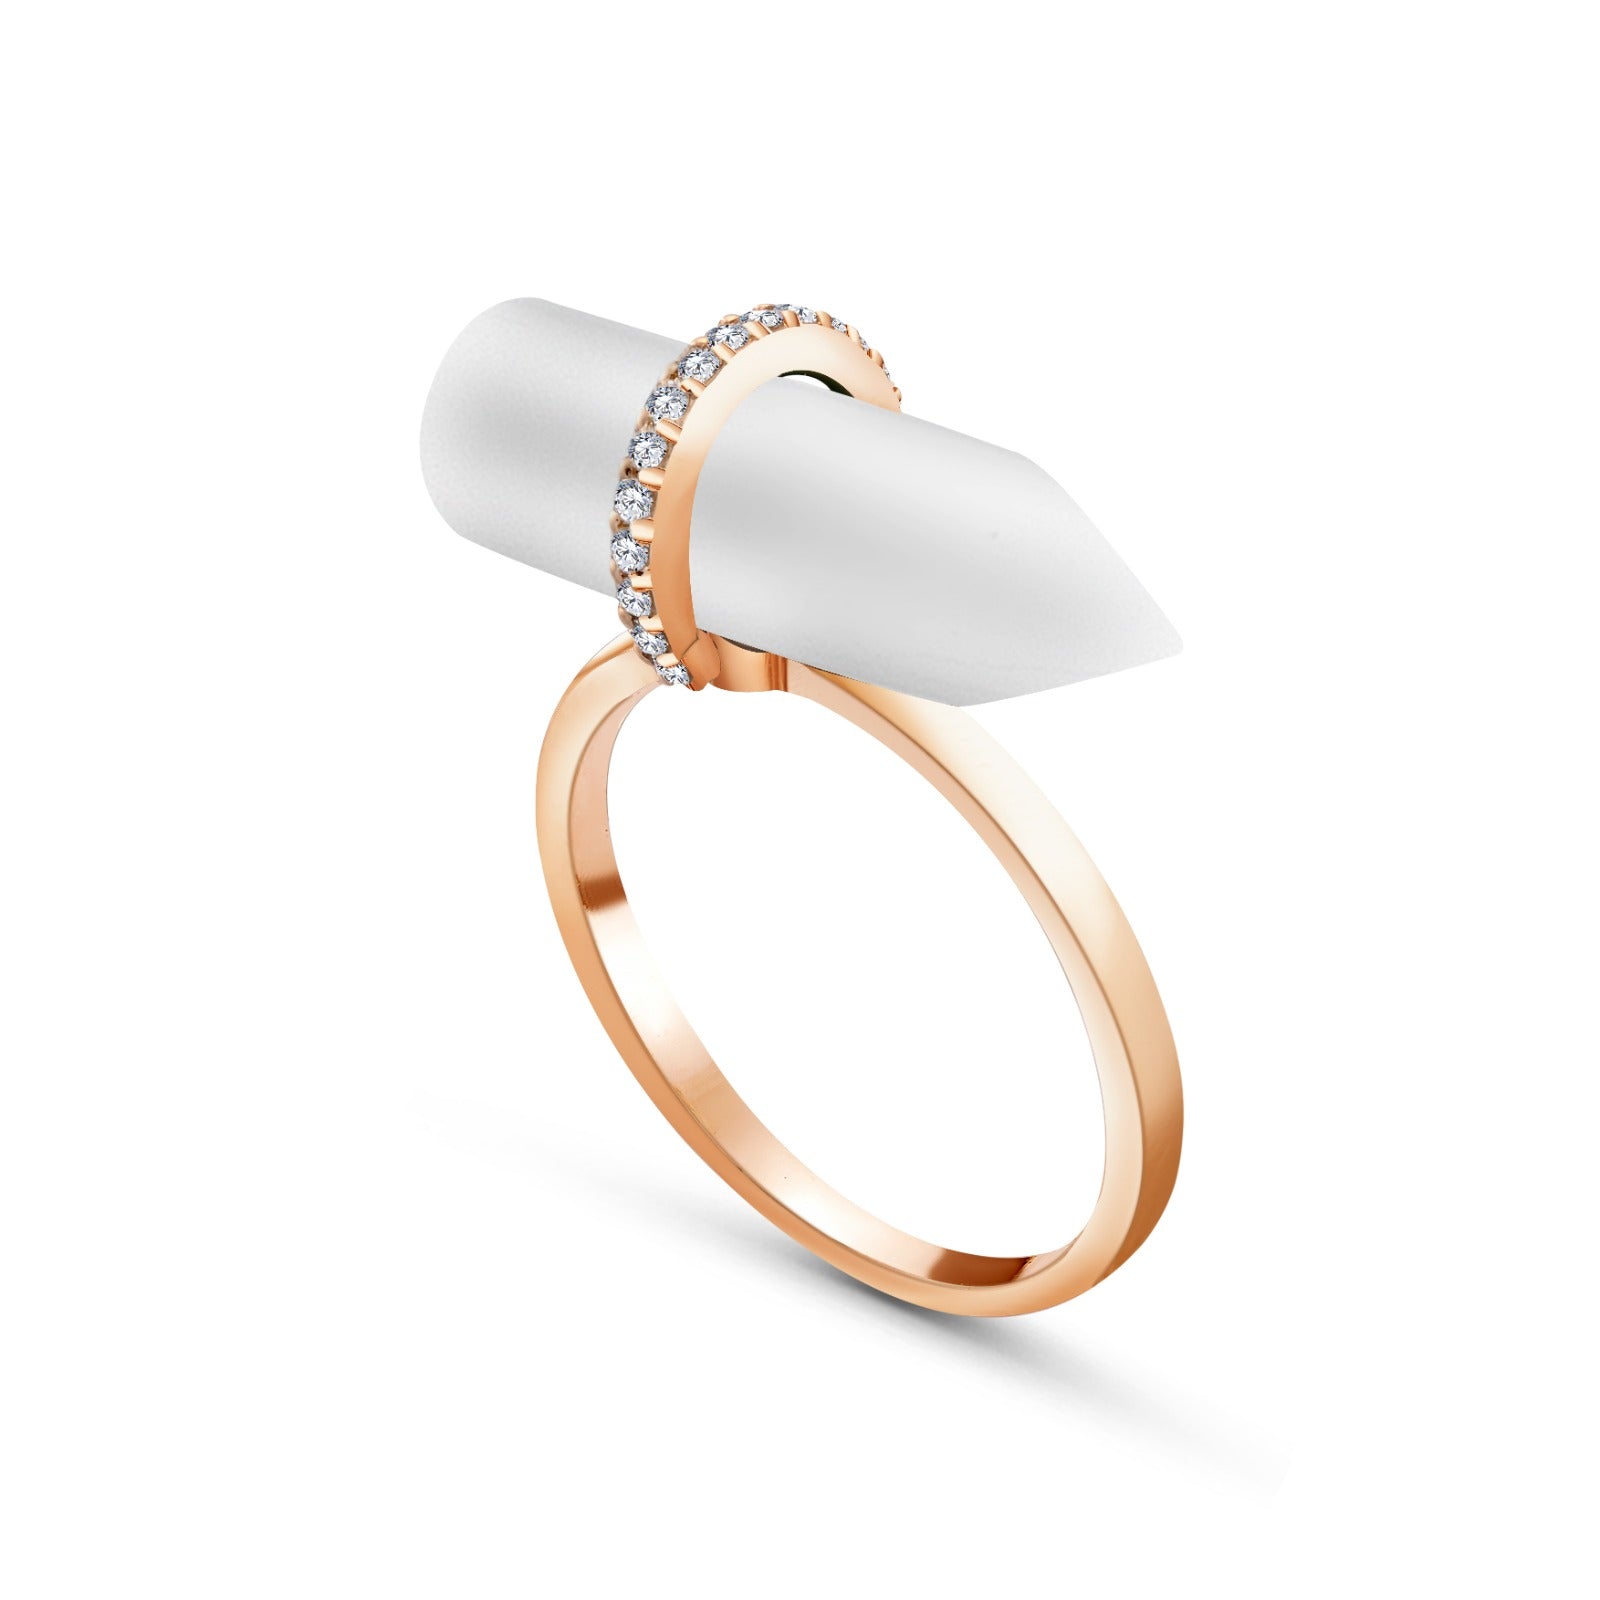 Mother of pearl Stone centered within a diamond circle ring in 18K ROSE Gold - s-r229s